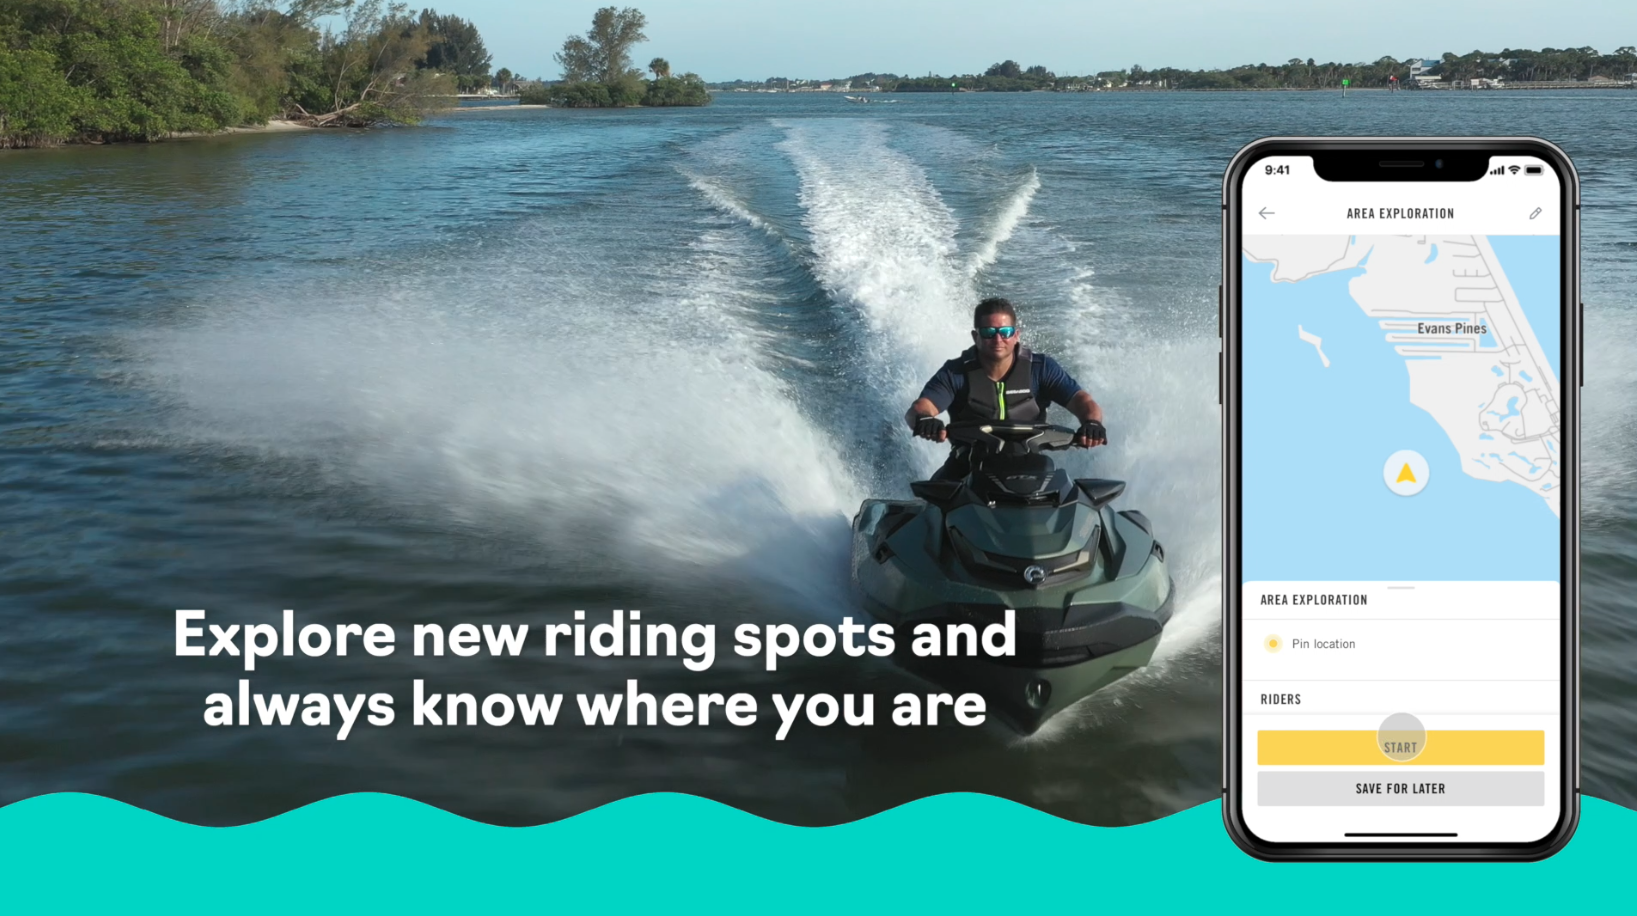 HOW TO CONNECT YOUR PHONE TO YOUR SEA-DOO!